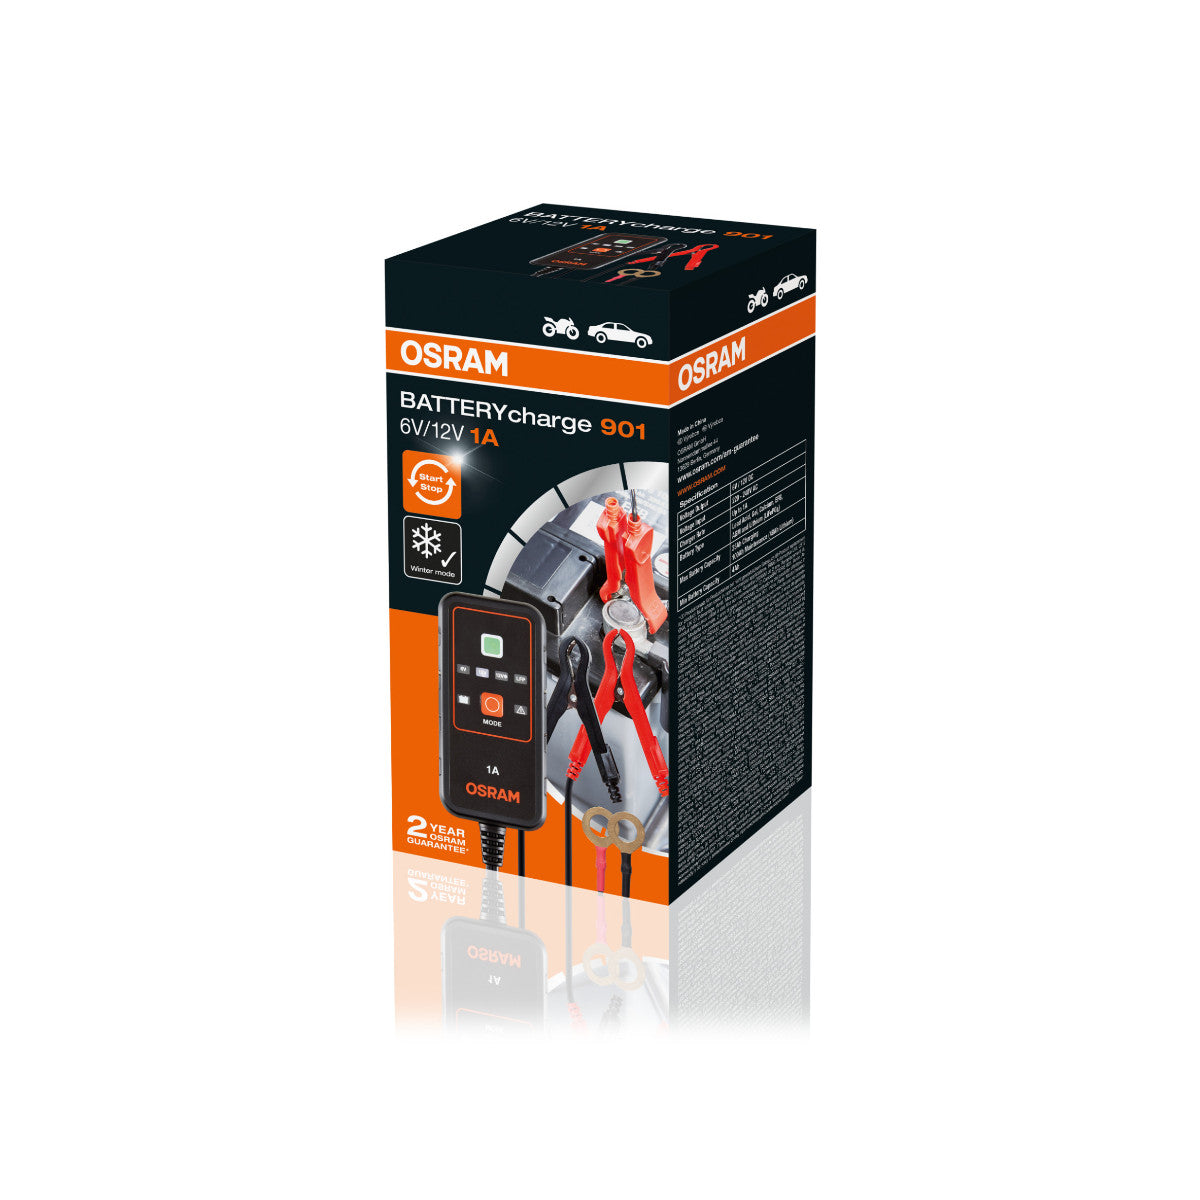 OSRAM BATTERY charge - 901 Smart battery charger